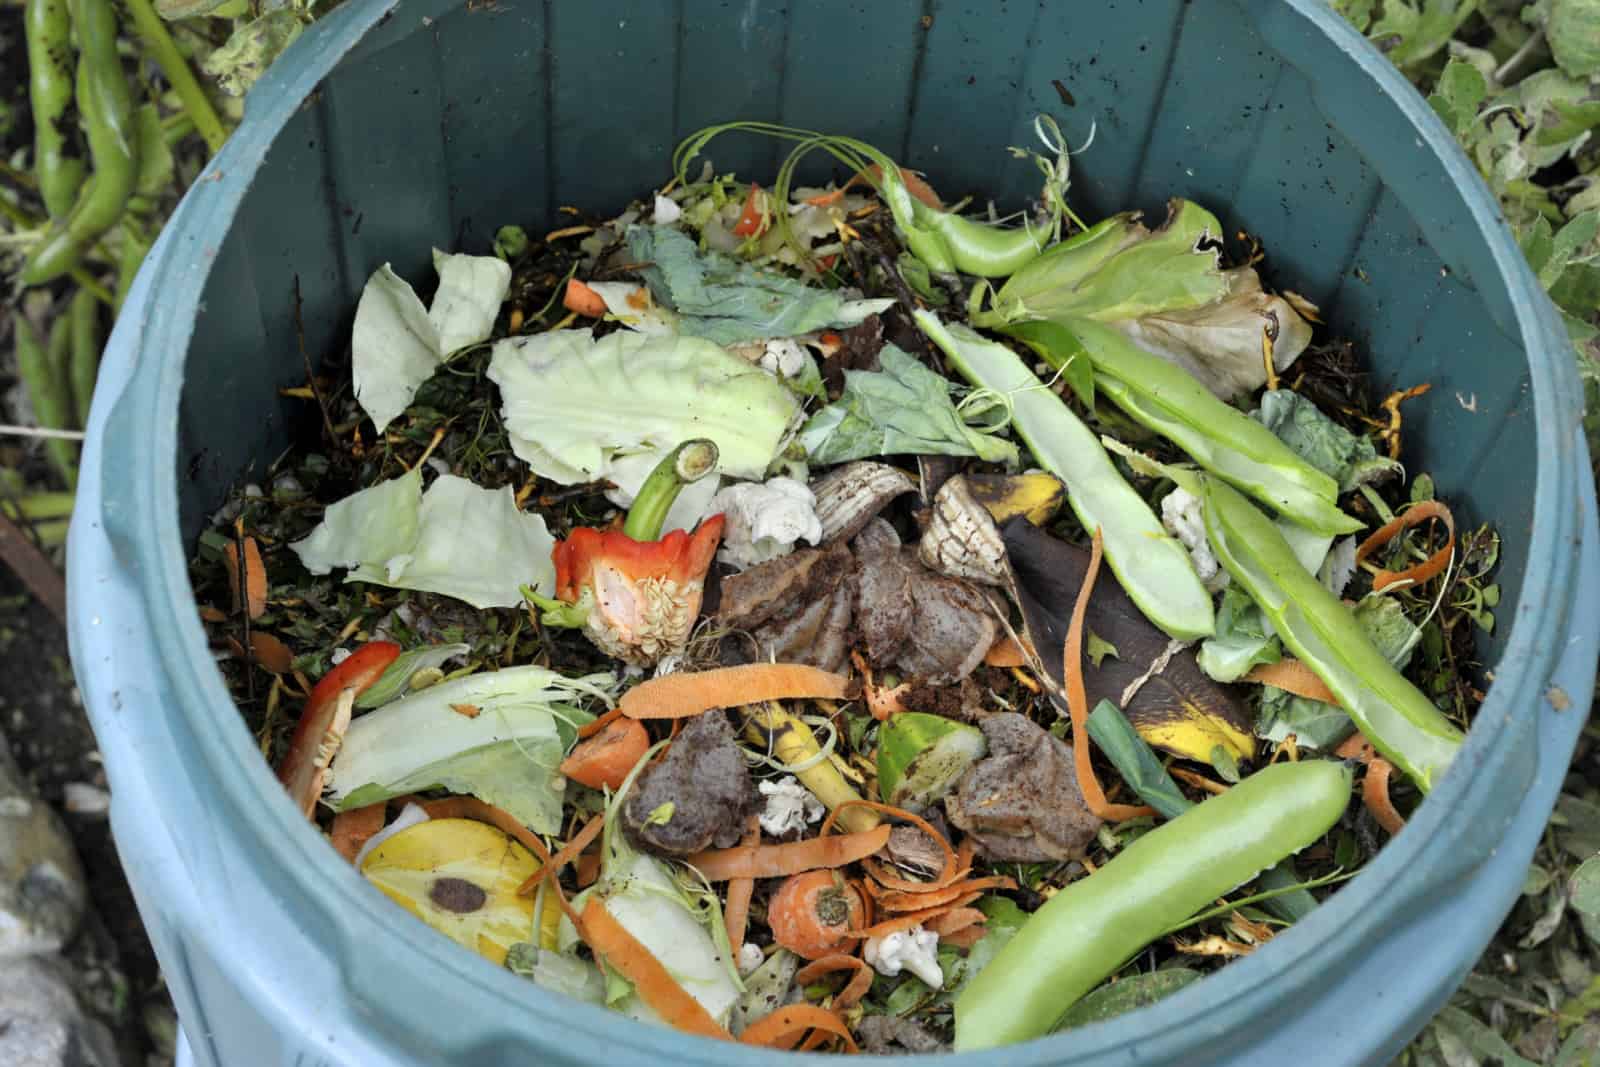 Recycling kitchen food waste in a home compost bin including fruit and vegetable peelings, tea bags and egg shells